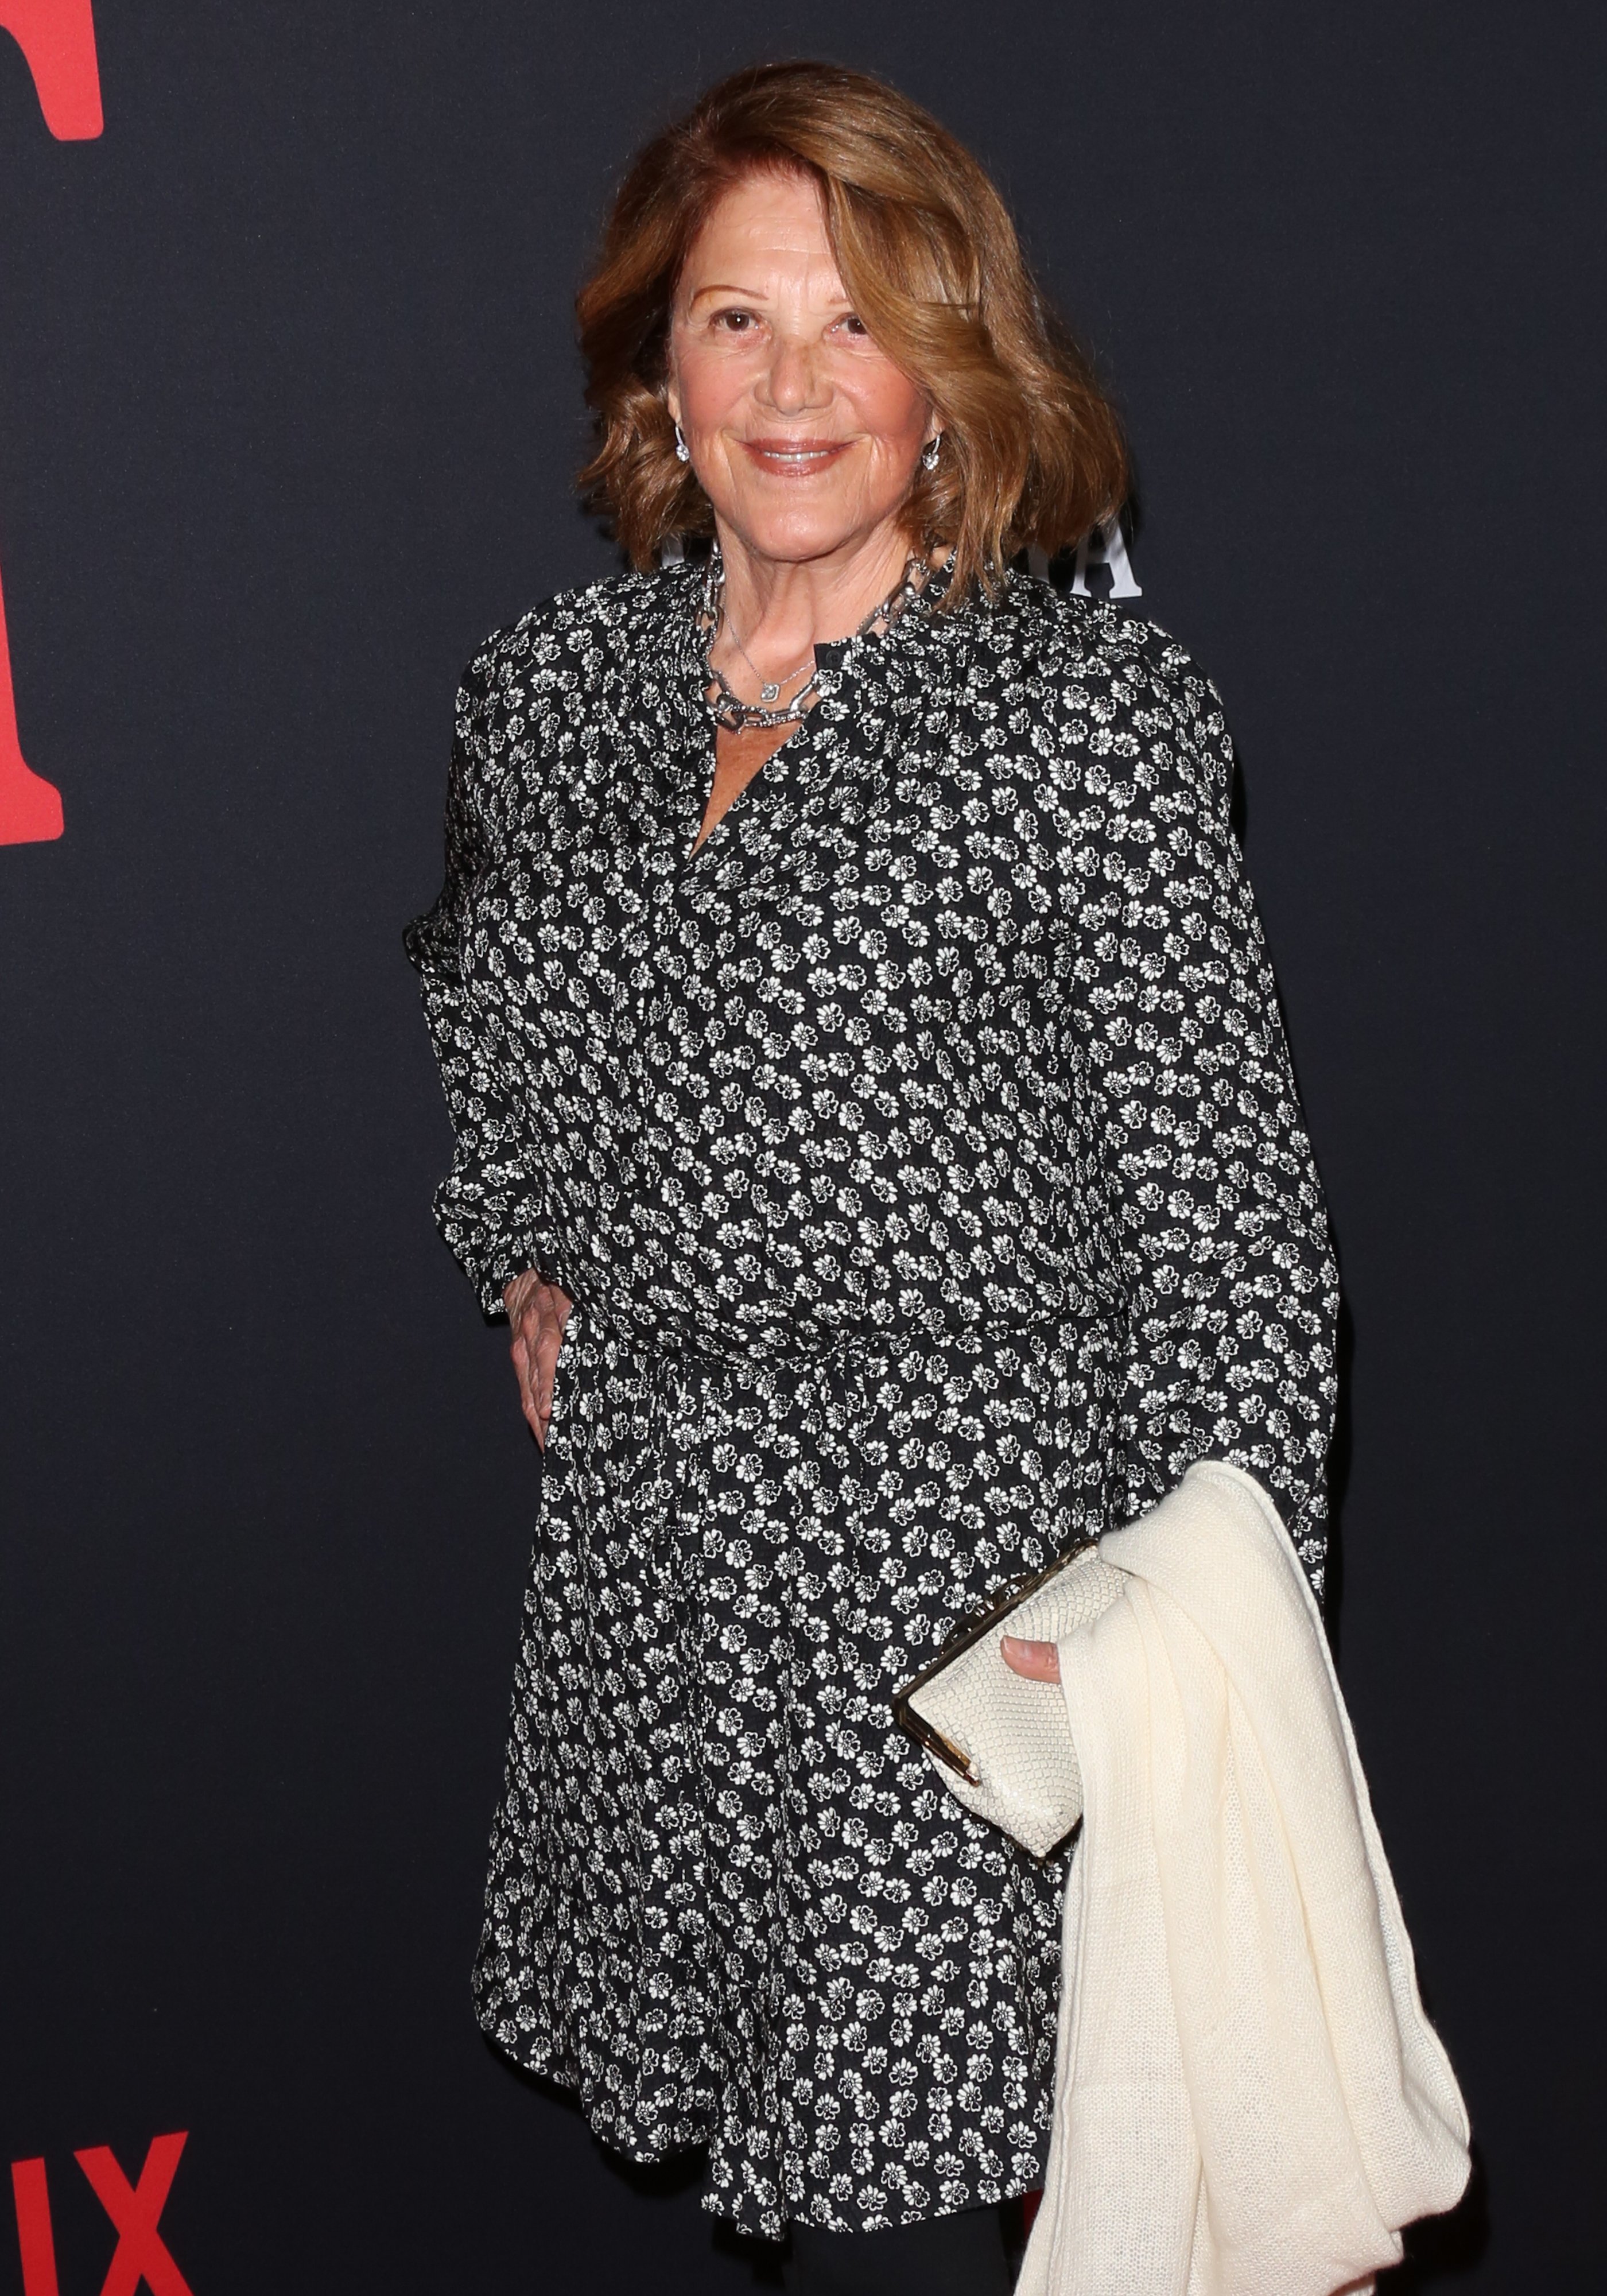 Linda Lavin attends Netflix's "Santa Clarita Diet" season 3 premiere at Hollywood Post 43 on March 28, 2019, in Los Angeles, California. | Source: Getty Images